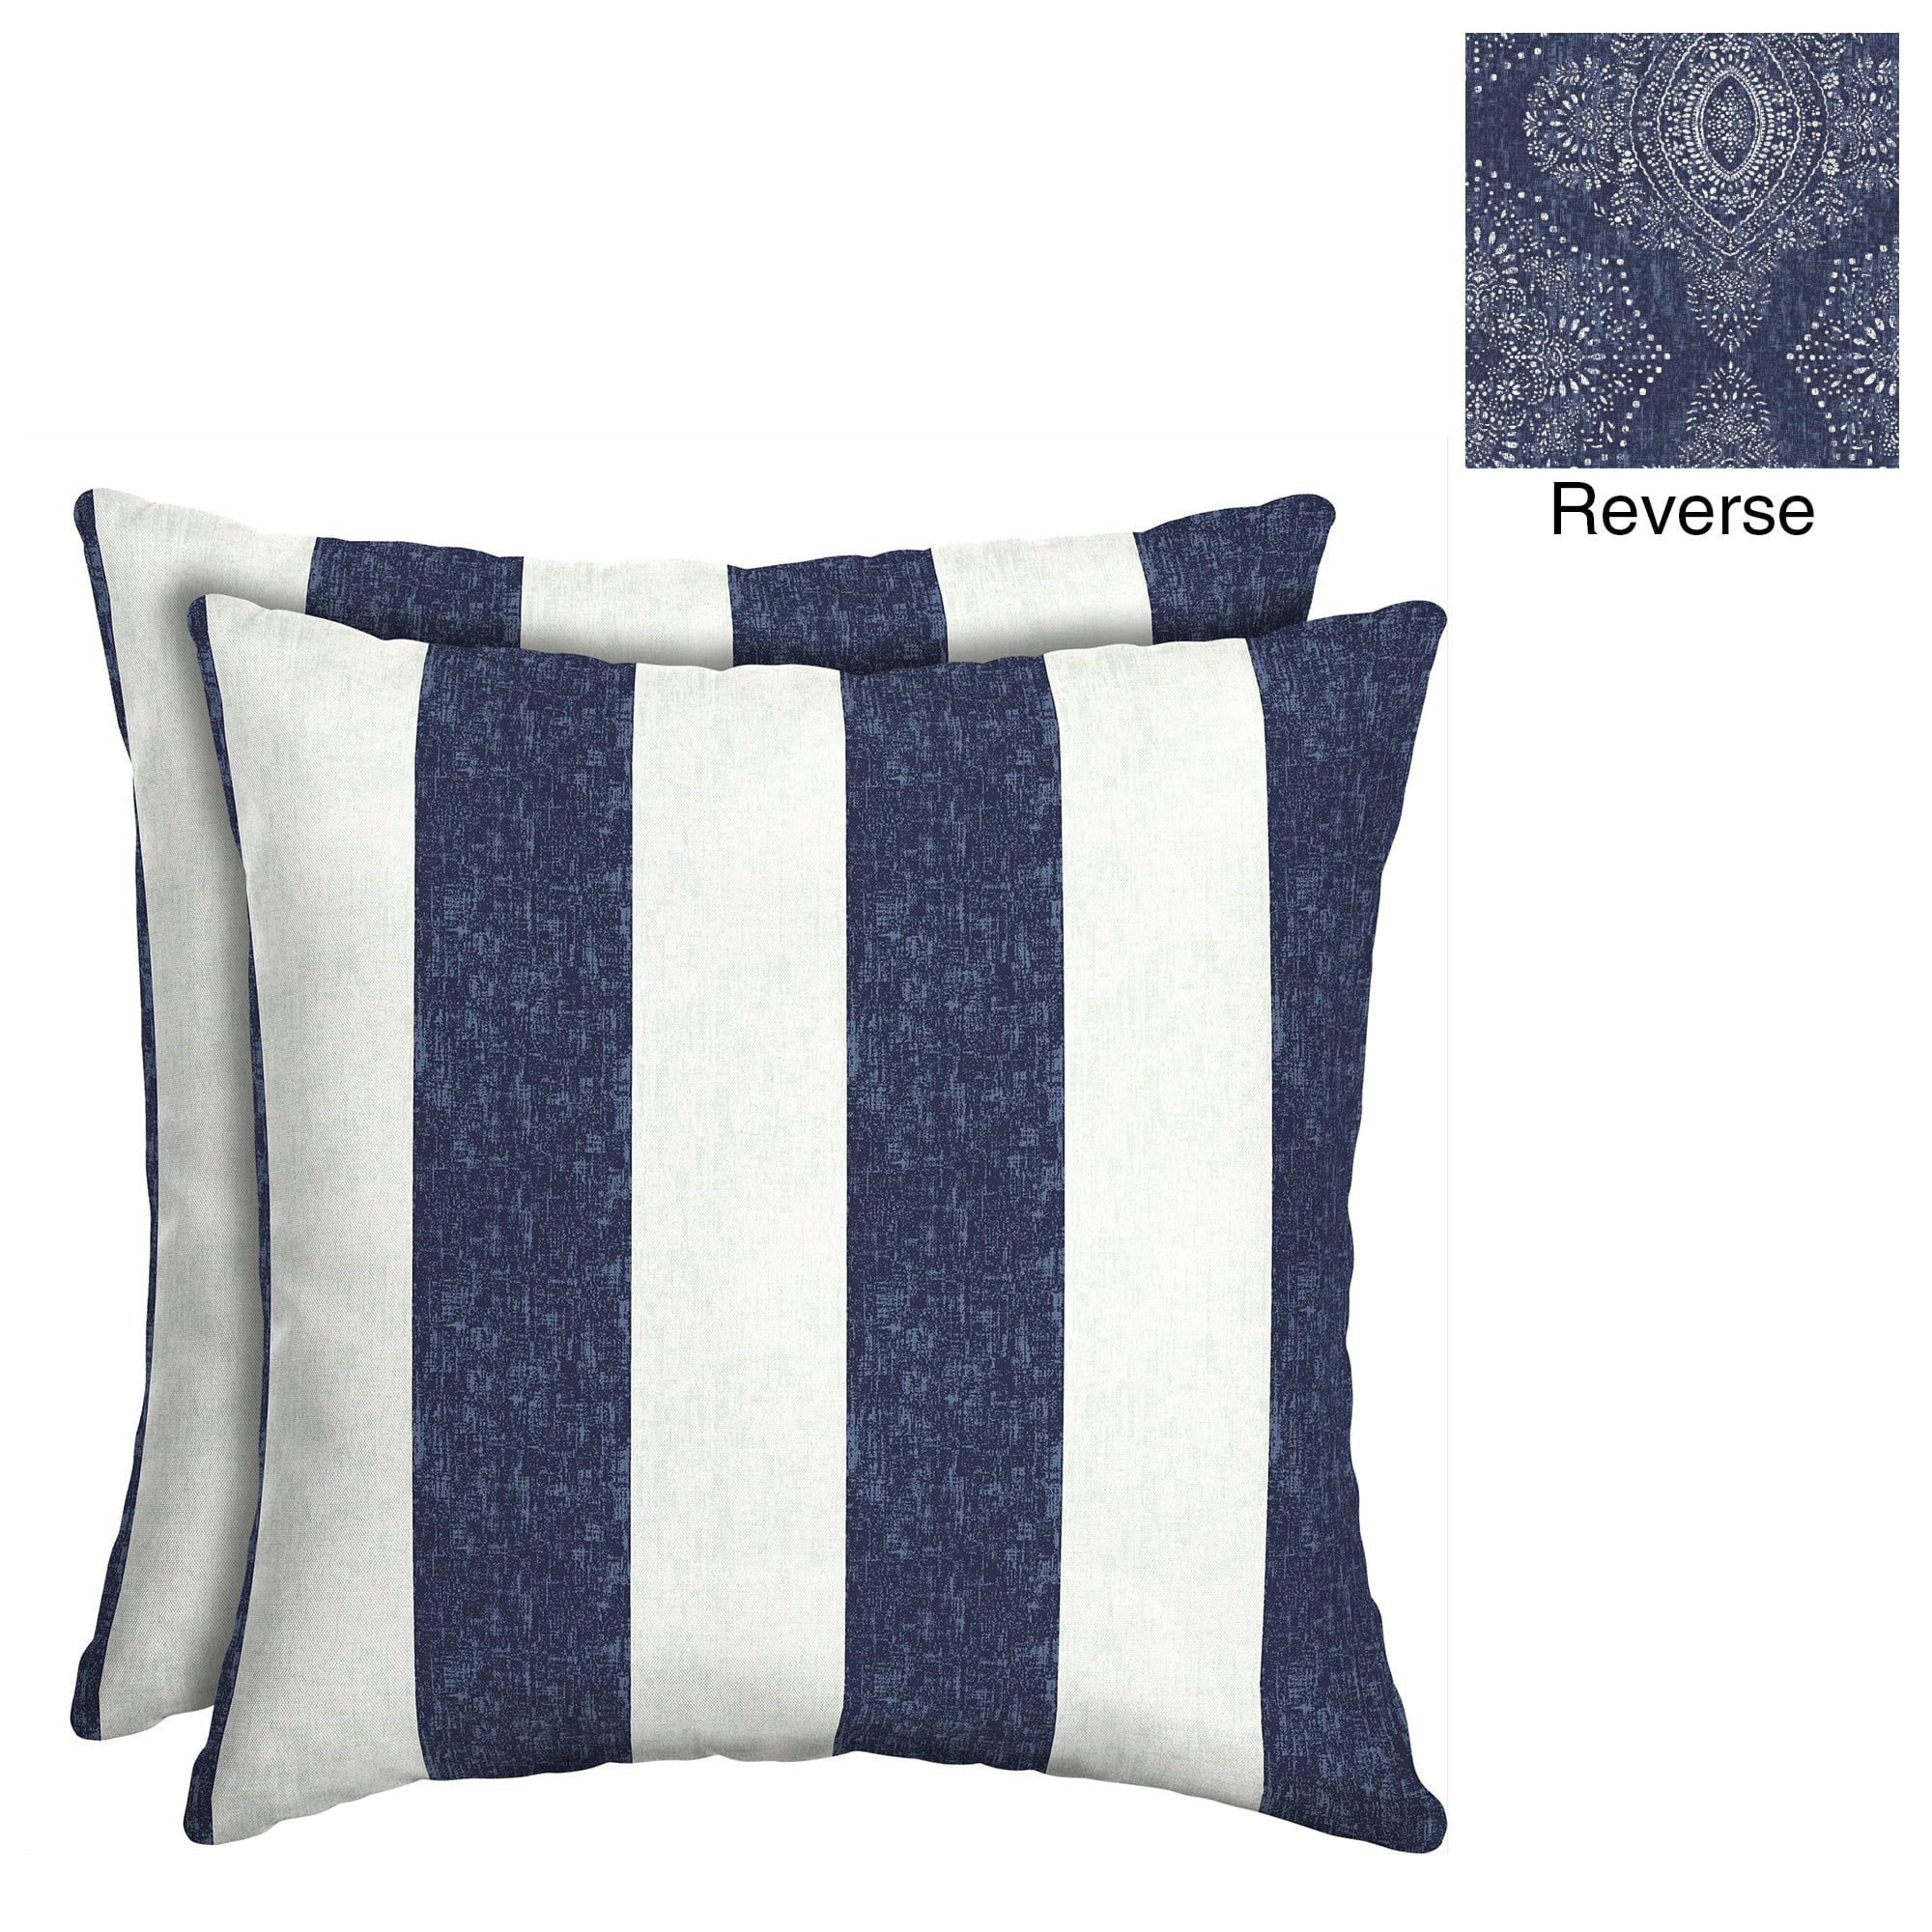 Better Homes & Gardens Blue Pointelized Ogee Stripe 16 in. Square Outdoor Toss Pillow - Set of 2 | Walmart (US)